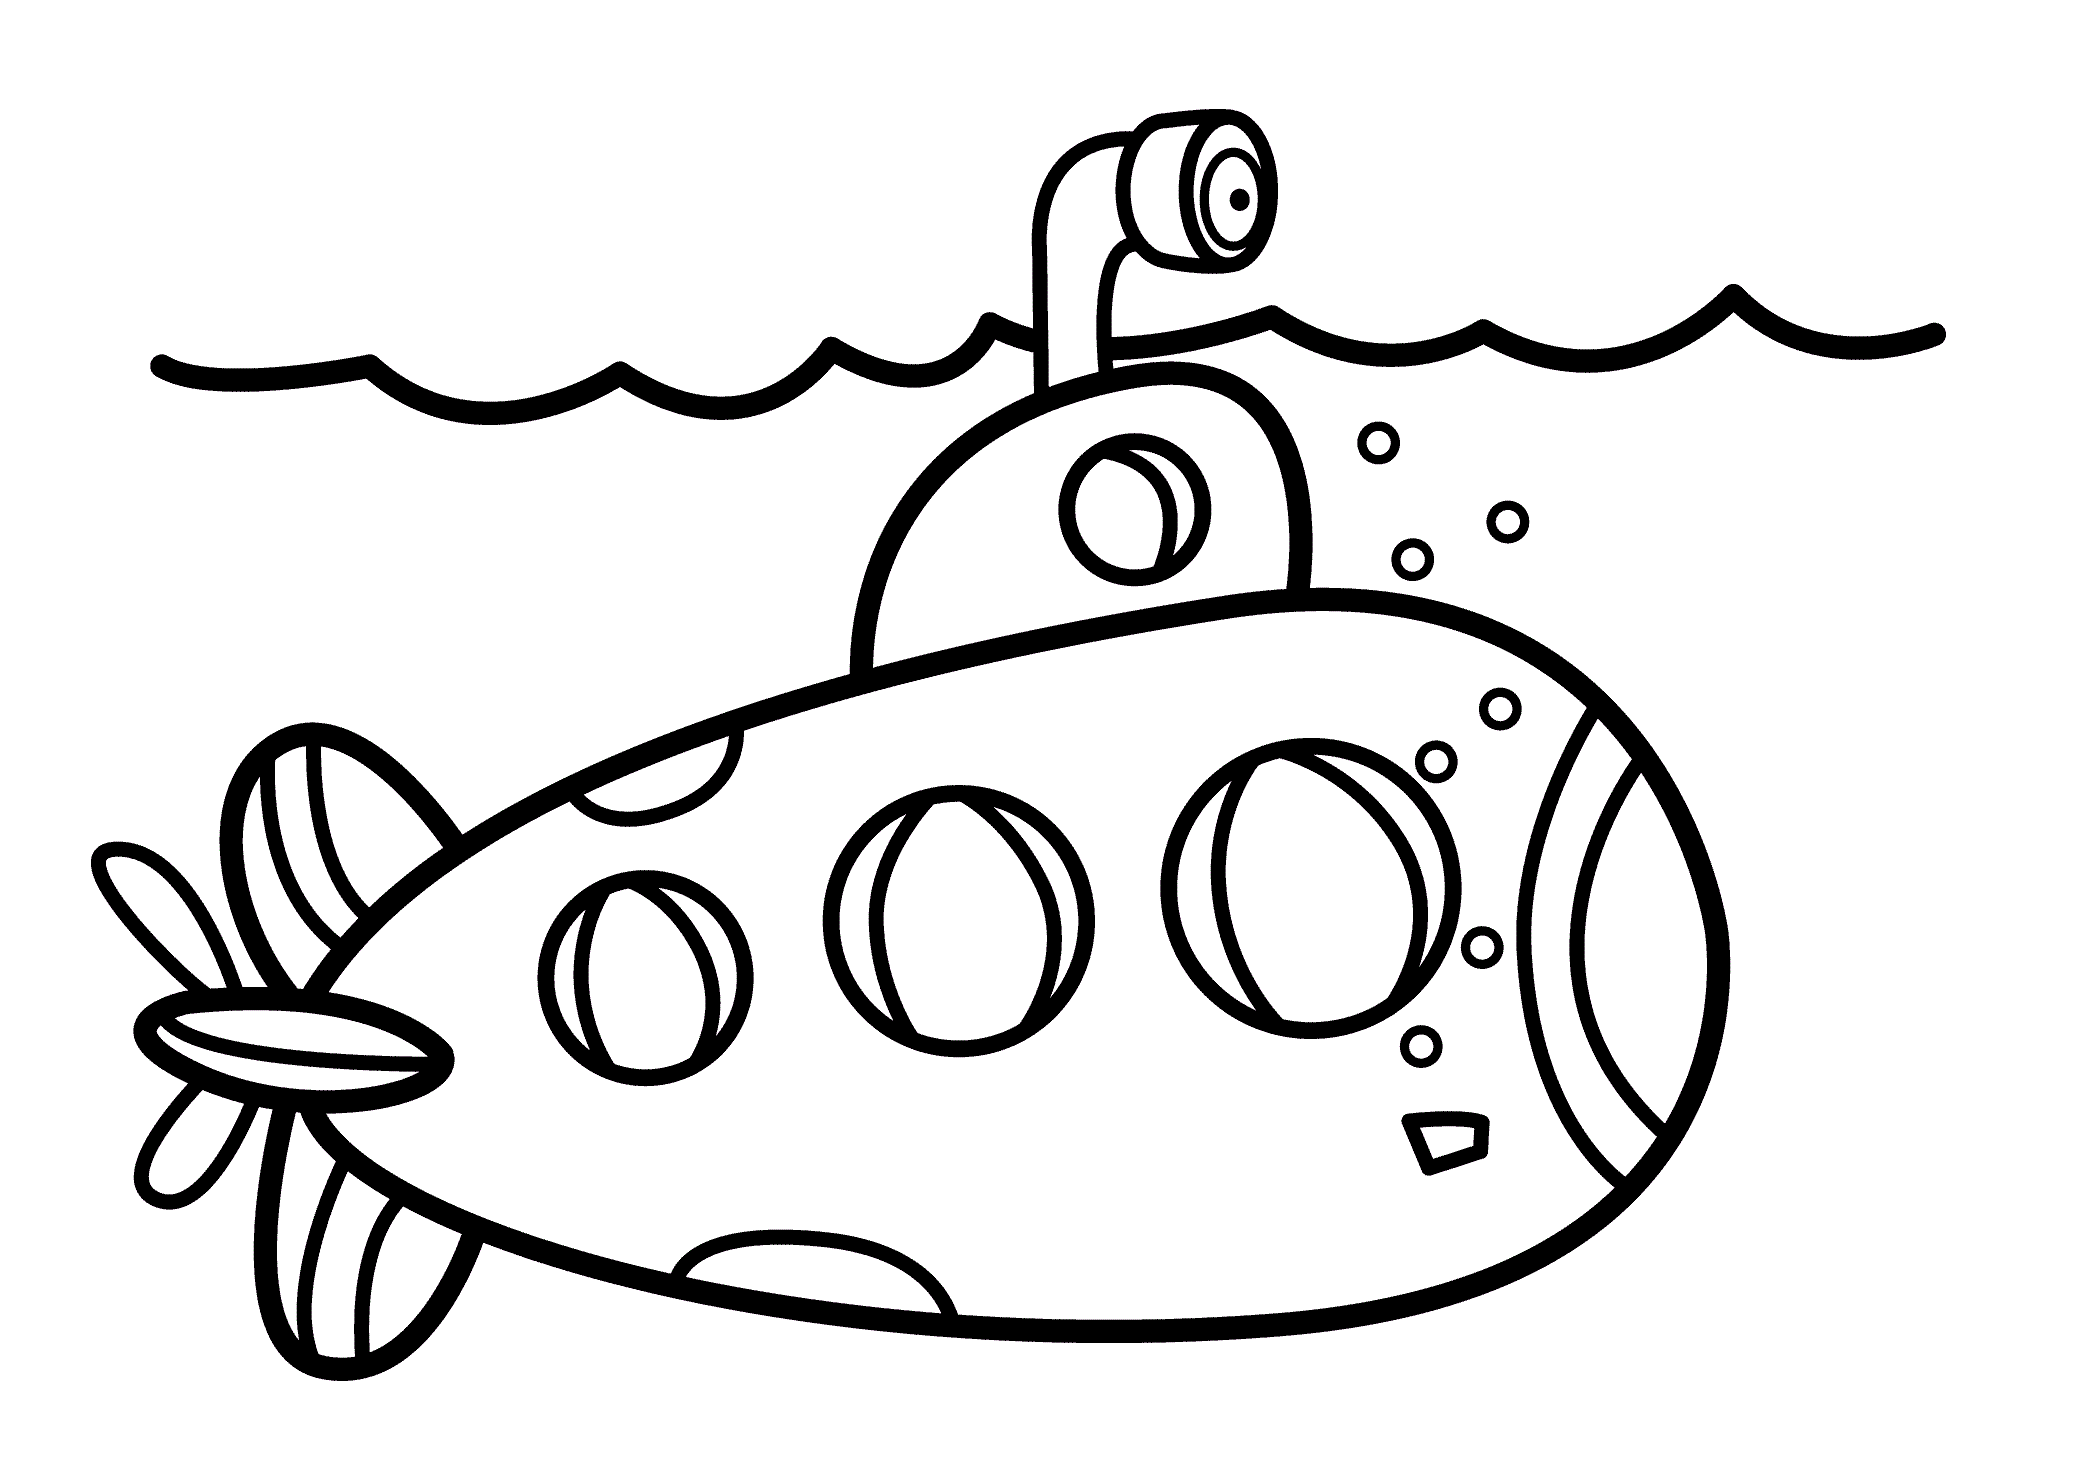 Submarine Coloring Pages Printable - High Quality Coloring Pages